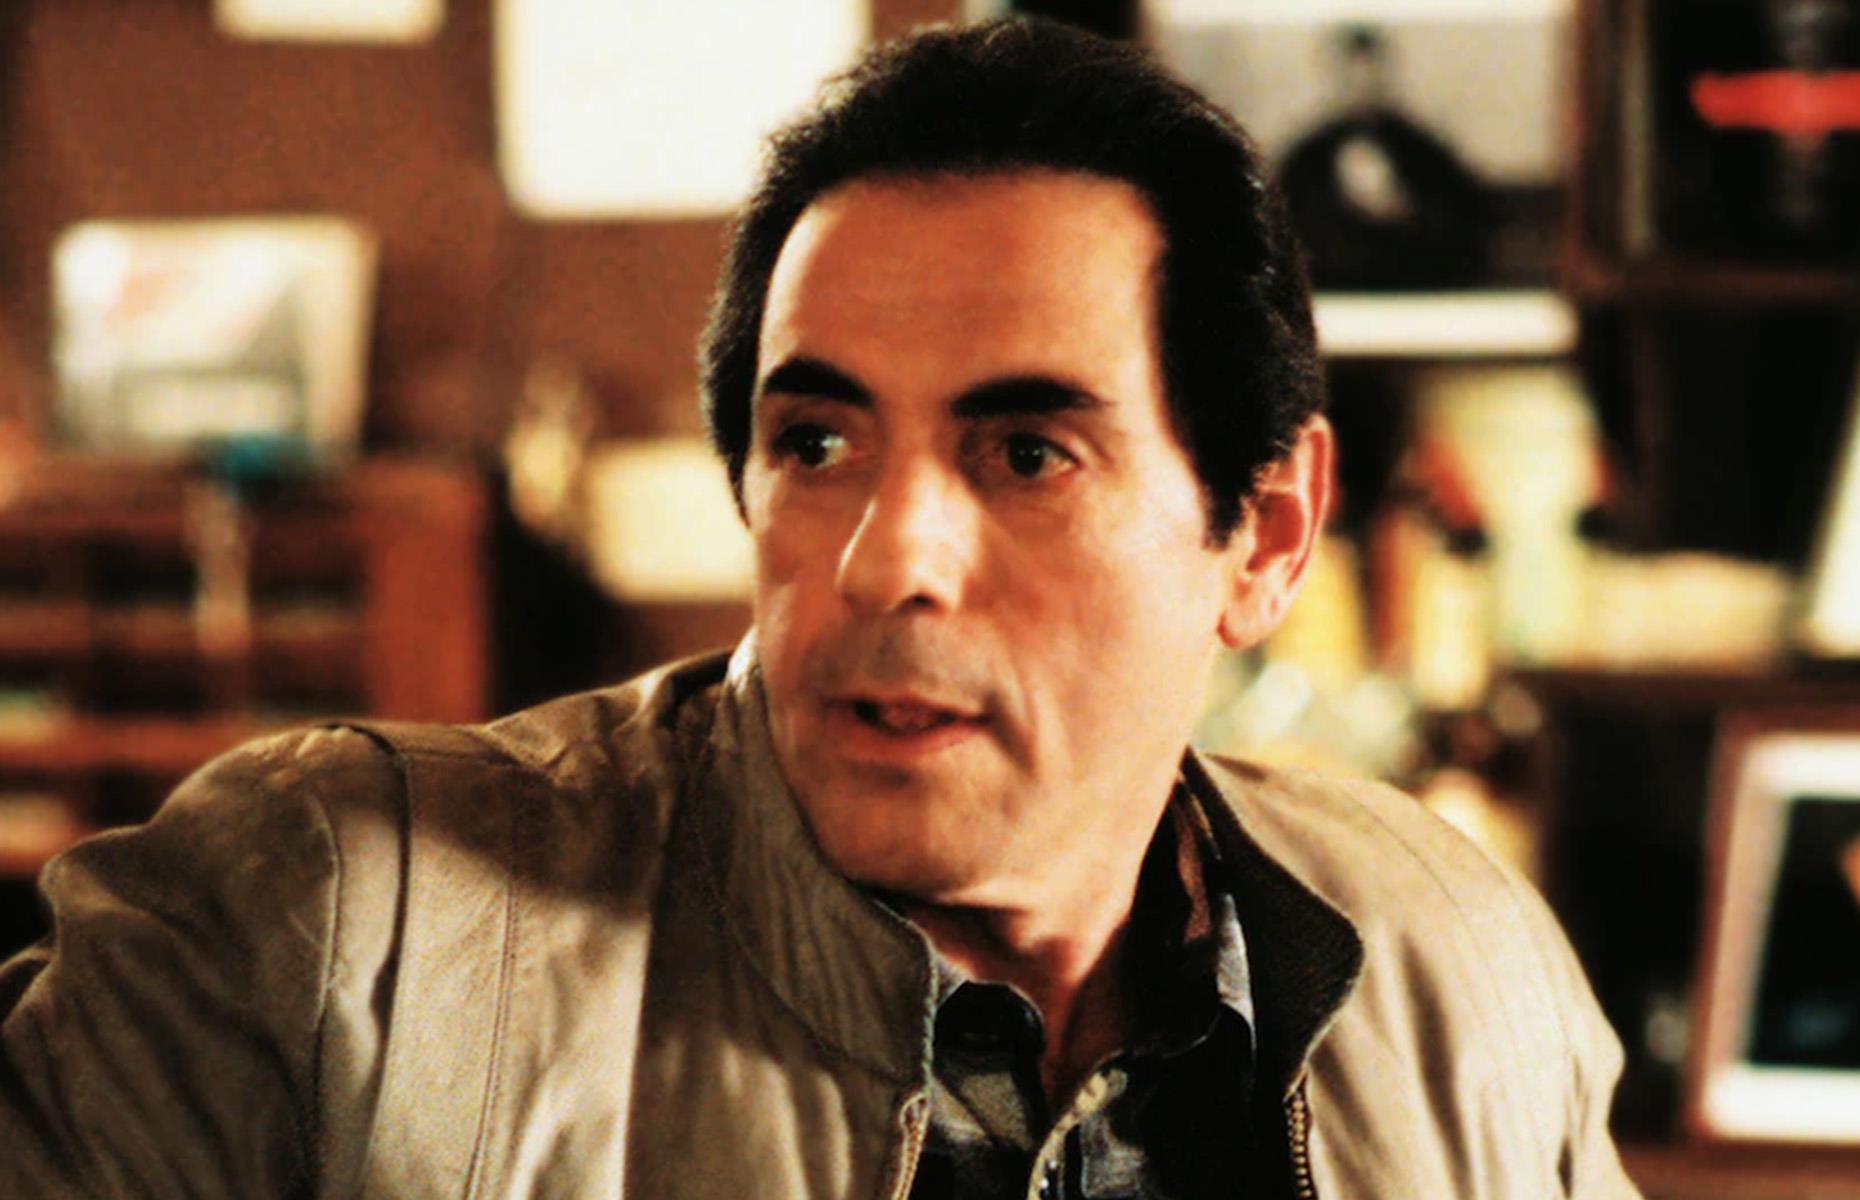 <p>David Proval played the recurring role of Richie Aprile, a ruthless "capo" (leader) and member of the DiMeo crime family.</p>  <p>Proval was already an established actor before joining <em>The Sopranos</em> cast. He rose to fame after starring alongside Robert De Niro in the 1973 Martin Scorsese crime flick <em>Mean Streets </em>and also appeared in a slew of hit TV shows throughout the 80s, including<em> Knight Rider,</em> <em>Miami Vice</em>, and <em>The Equalizer.</em></p>  <p>He appeared in 10 episodes of <em>The Sopranos</em>, leaving the show when his character was killed off. </p>